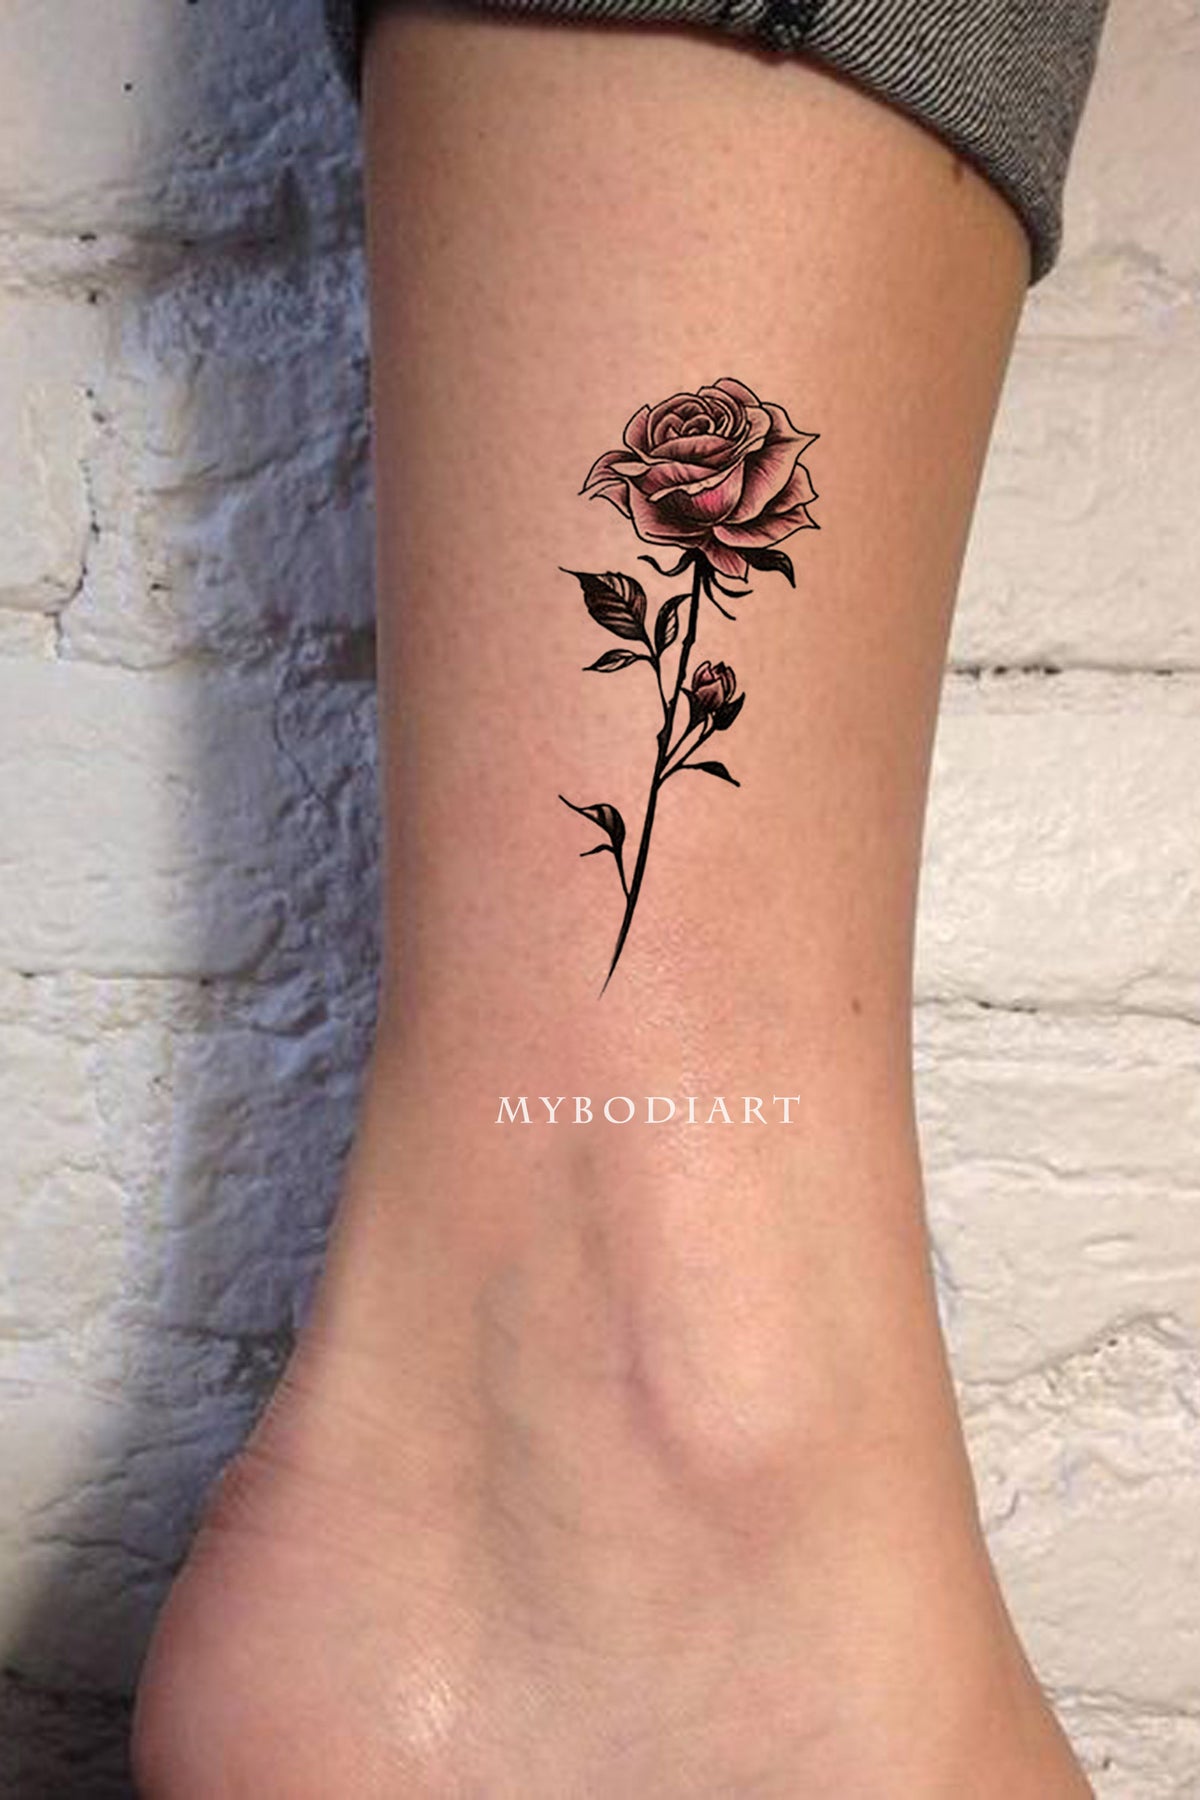 Ankle Tattoos  54 Cute And Dashing Tattoos Designs  Ideas For Women